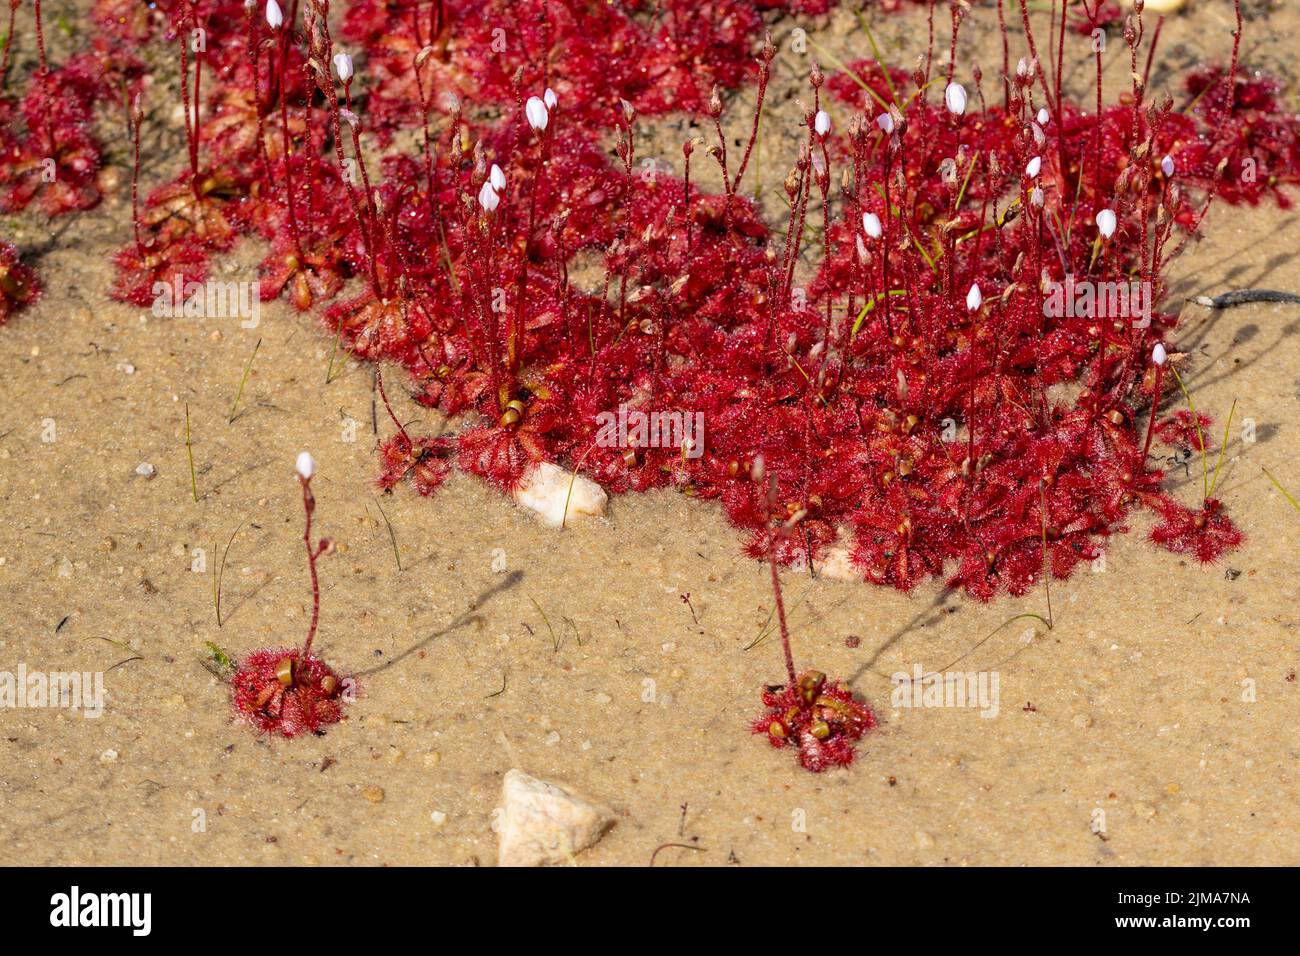 Group of red Drosera (a carnivorous plant) with white flowers growing in sandy habitat near Nieuwoudtville in South Africa, view from above Stock Photo